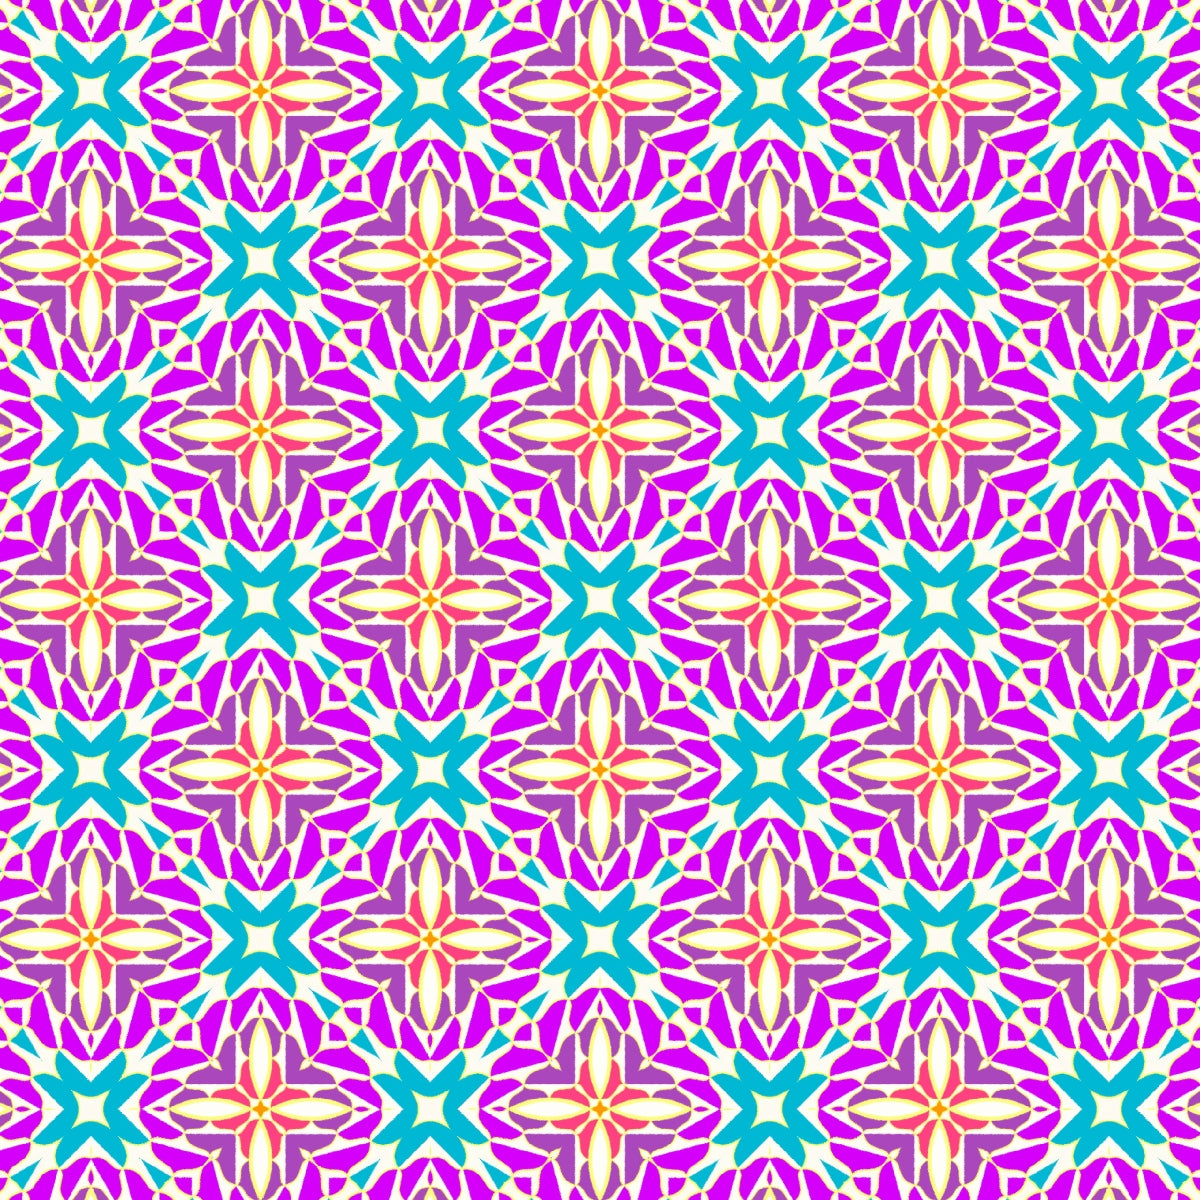 Pastels Abstract Seamless Pattern 53.0 - Printable Scrapbook Paper 